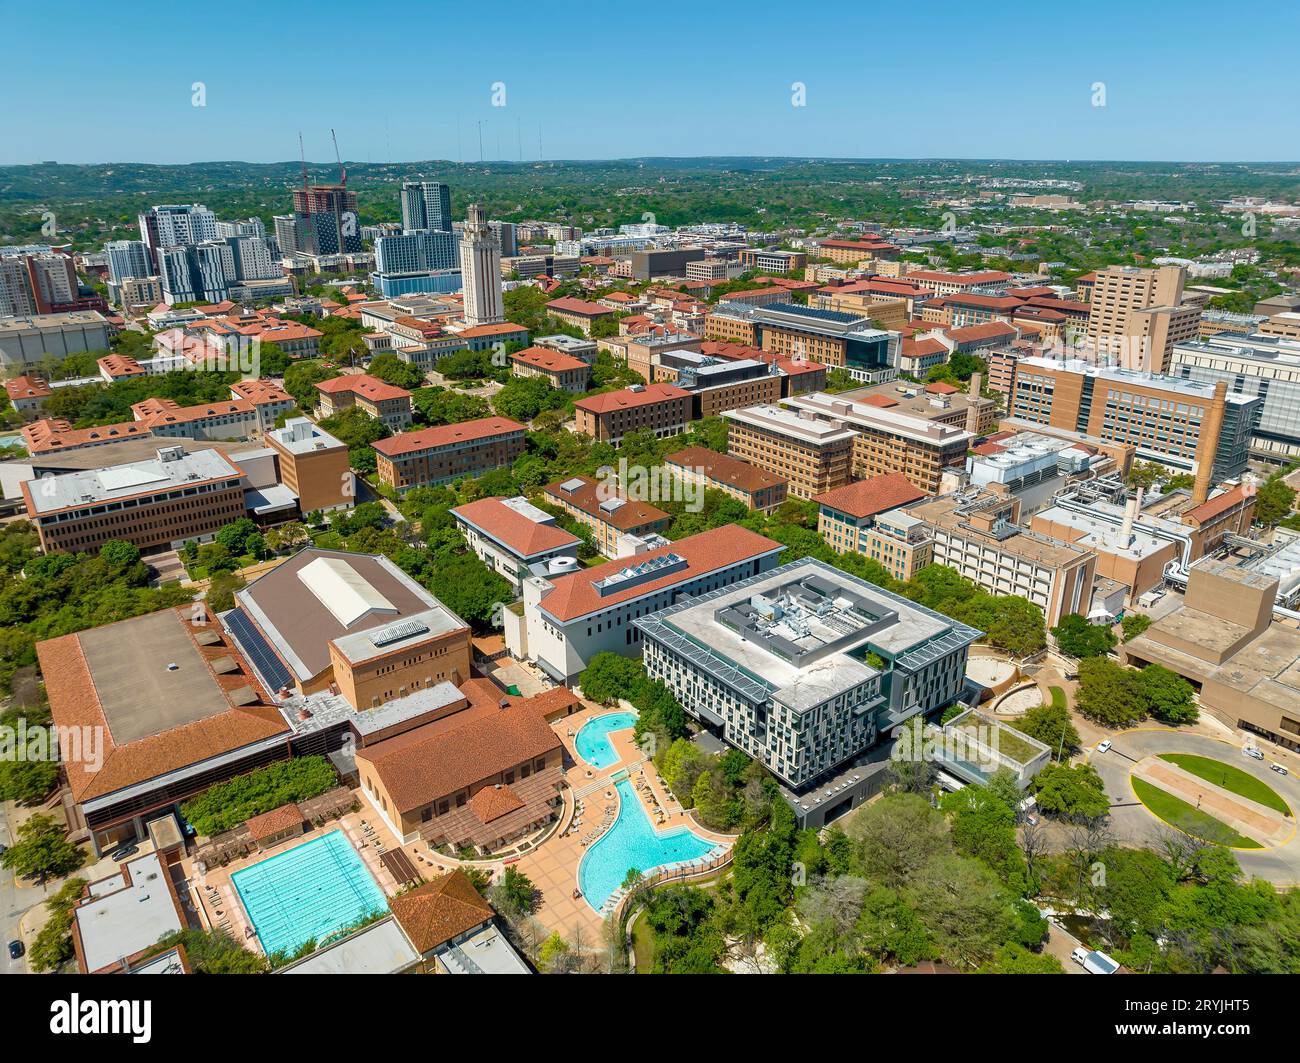 Aerial View Of The Main Building At The University of Texas at Austin Campus Stock Photo